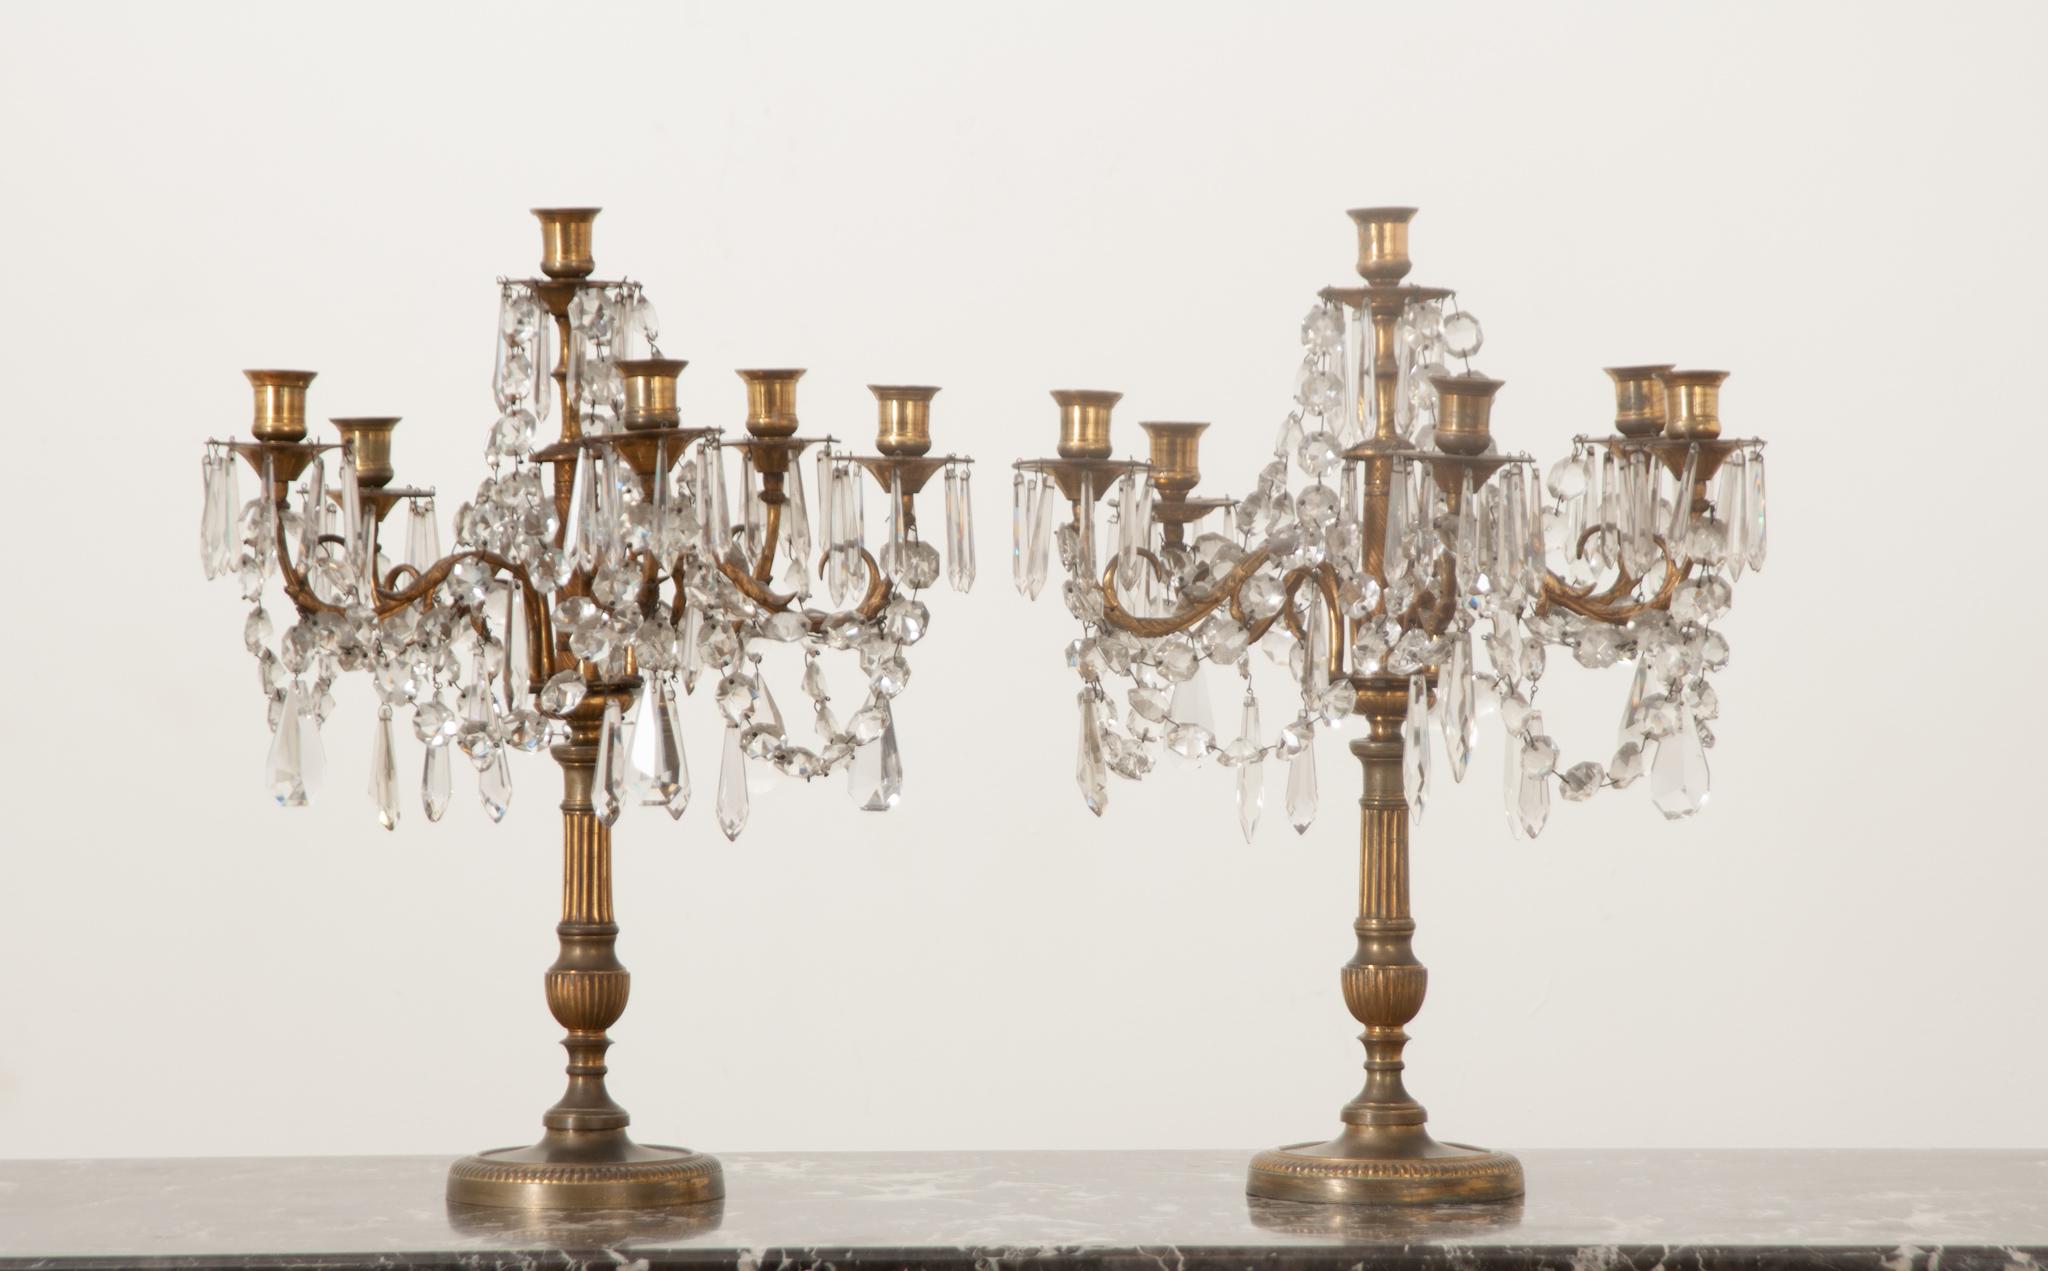 This dazzling pair of French girandoles or table chandeliers are in wonderful antique condition. Each fixture is centered with a gilt bronze Louis XVI style candelabra base with six sweeping arms and candle cups. The arms of the girandoles are